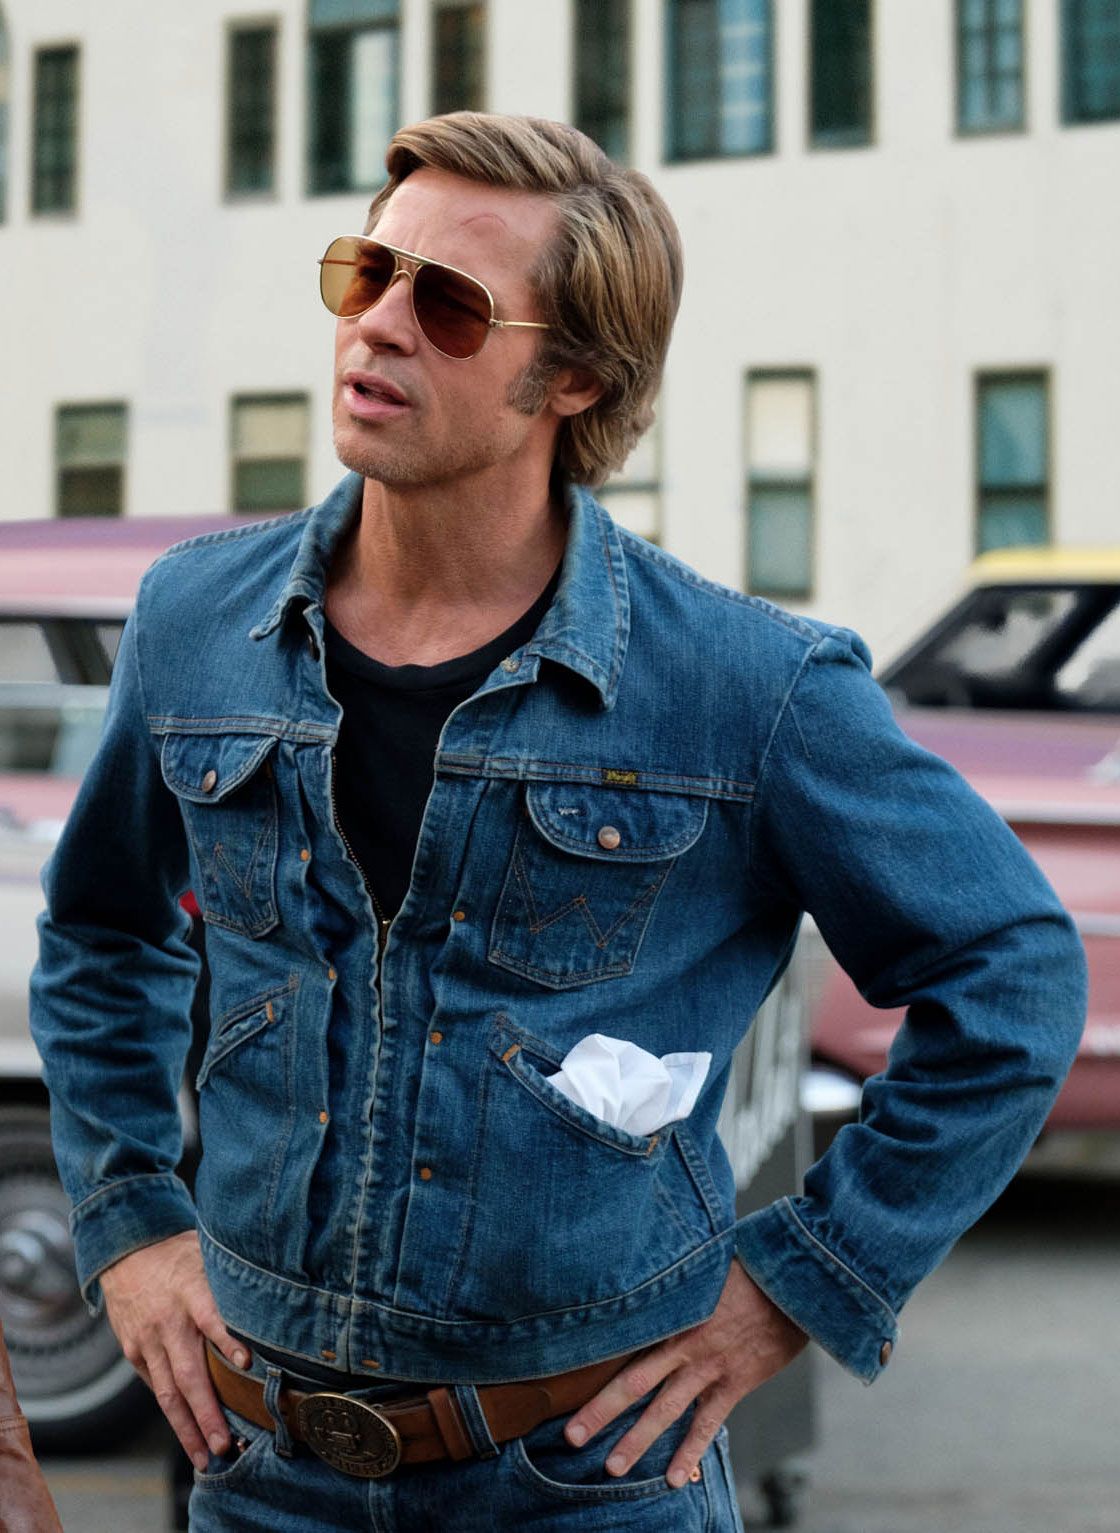 Brad Pitt's Wrangler Jean Jacket From 'Once Upon a Time...In